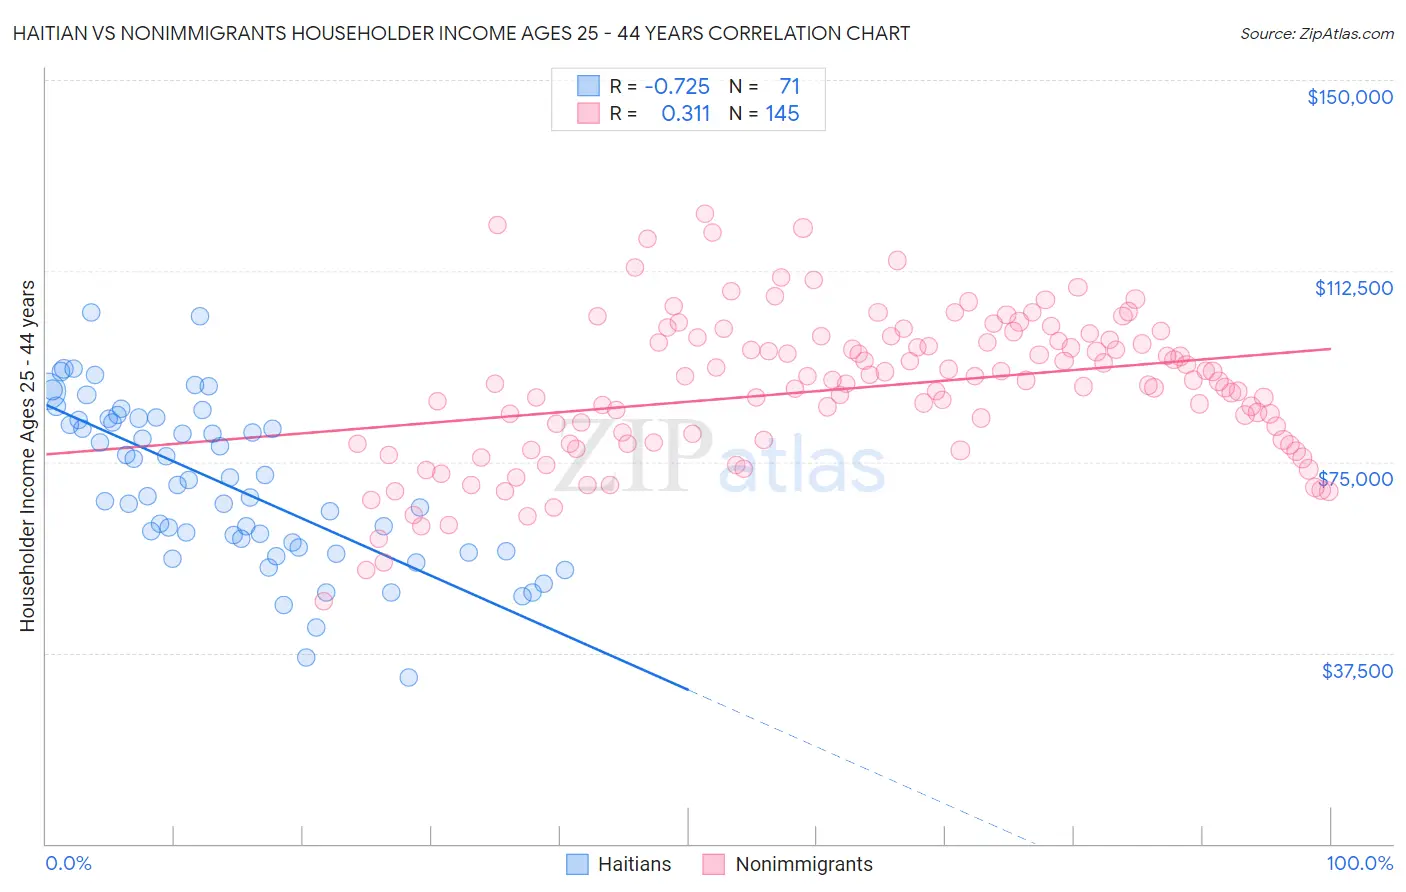 Haitian vs Nonimmigrants Householder Income Ages 25 - 44 years